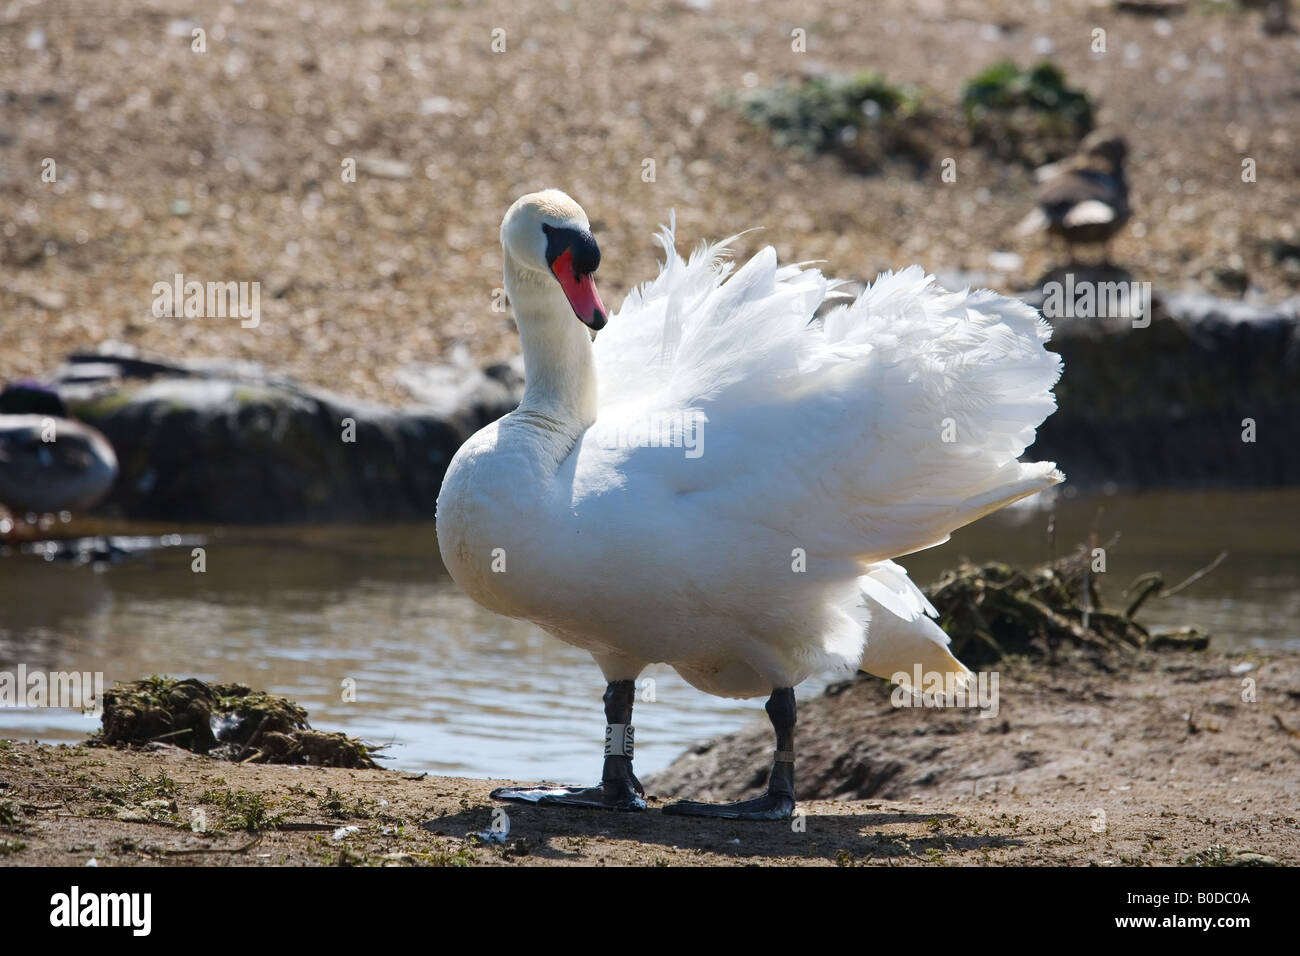 Ruffled feathers of and angry swan at Abbotsbury swannery, Dorset, UK Stock Photo